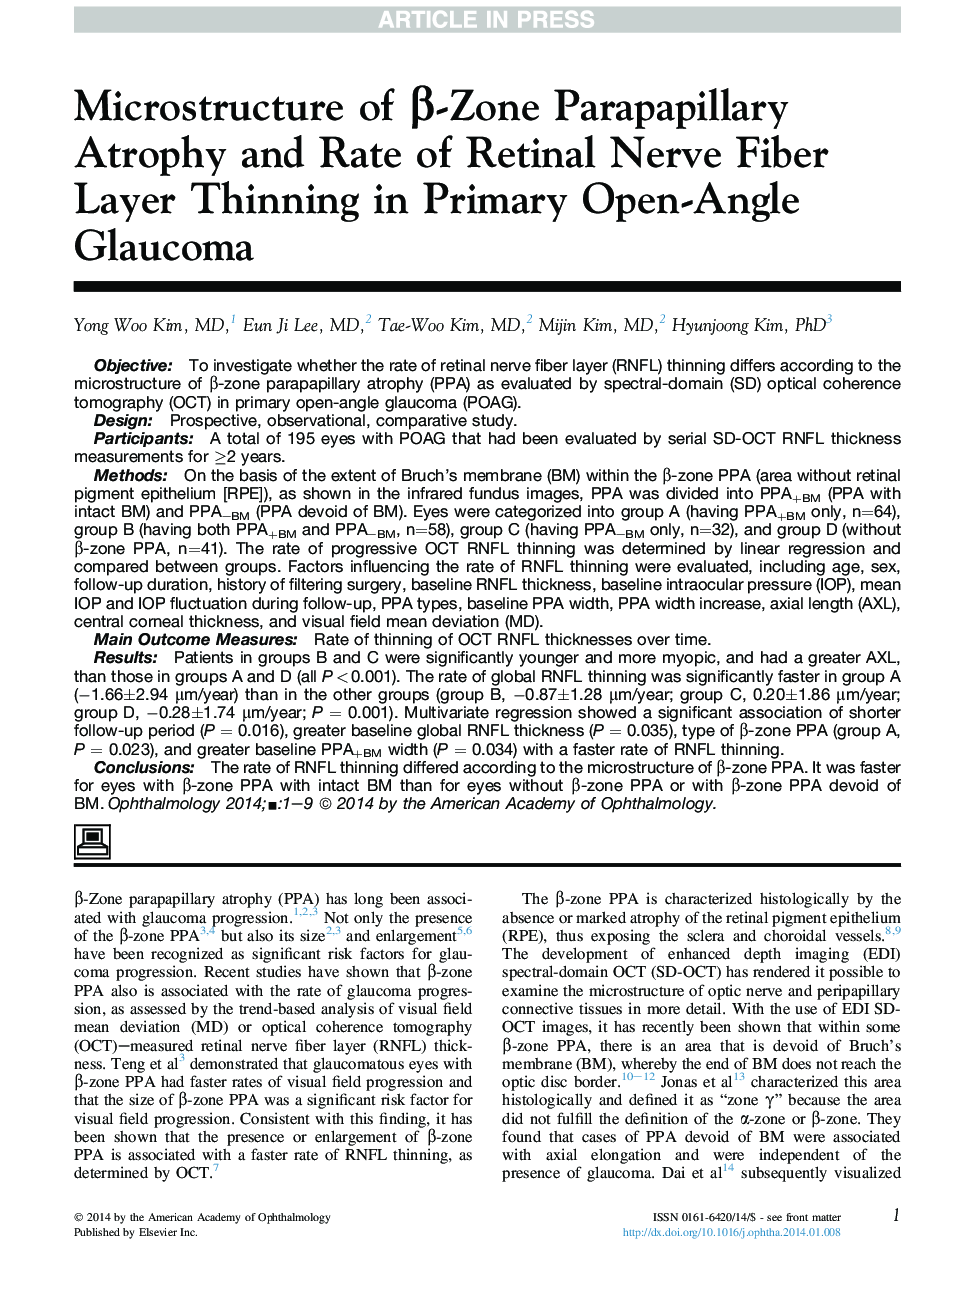 Microstructure of Î²-Zone Parapapillary Atrophy and Rate of Retinal Nerve Fiber Layer Thinning in Primary Open-Angle Glaucoma